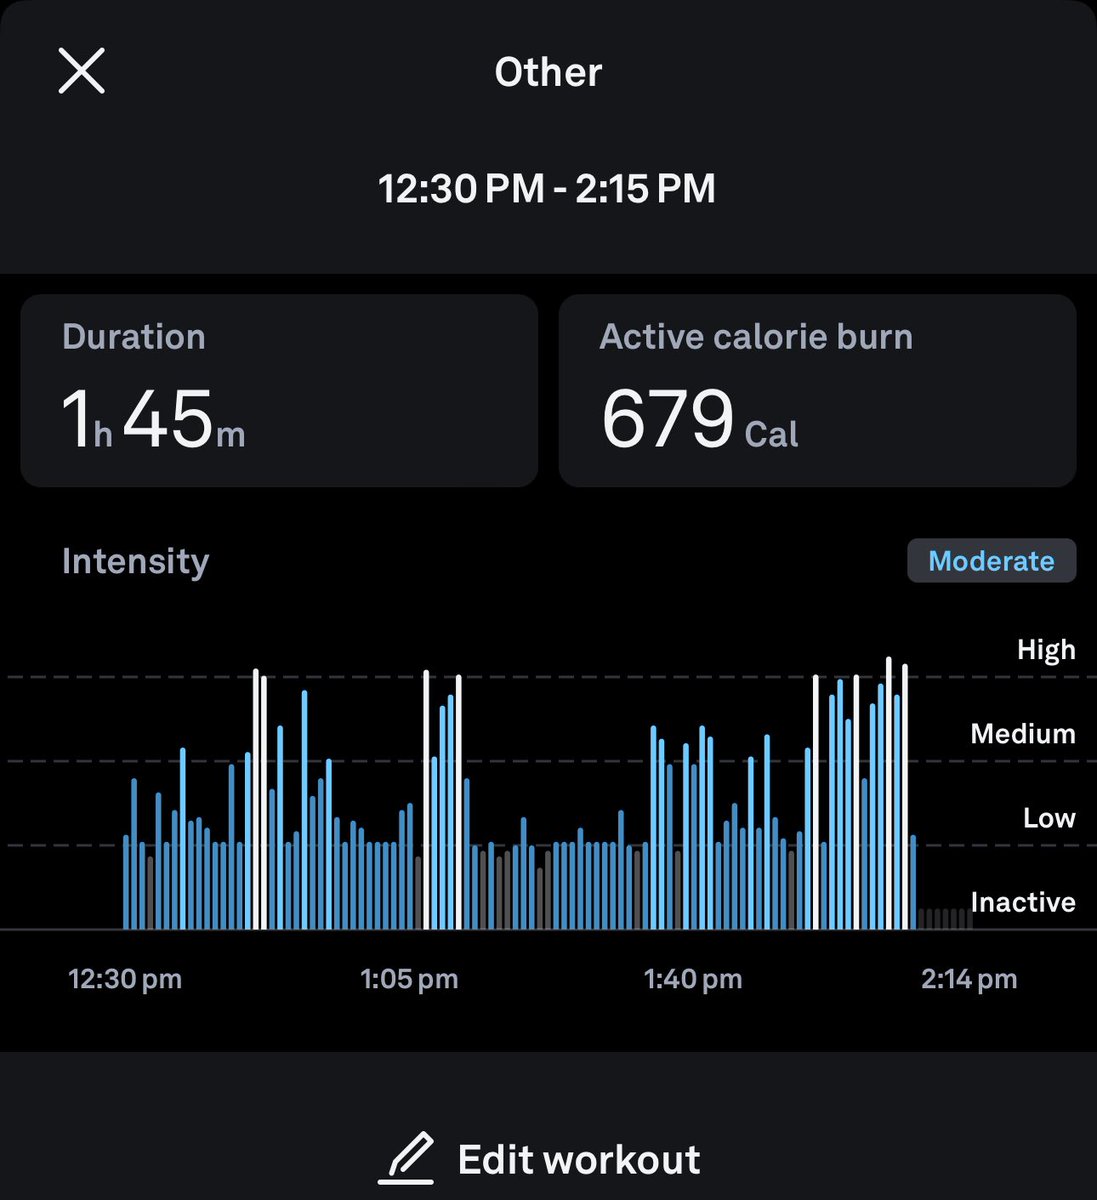 Every time I read Better Offline my Oura ring thinks I'm working out. Podcasting is cardio